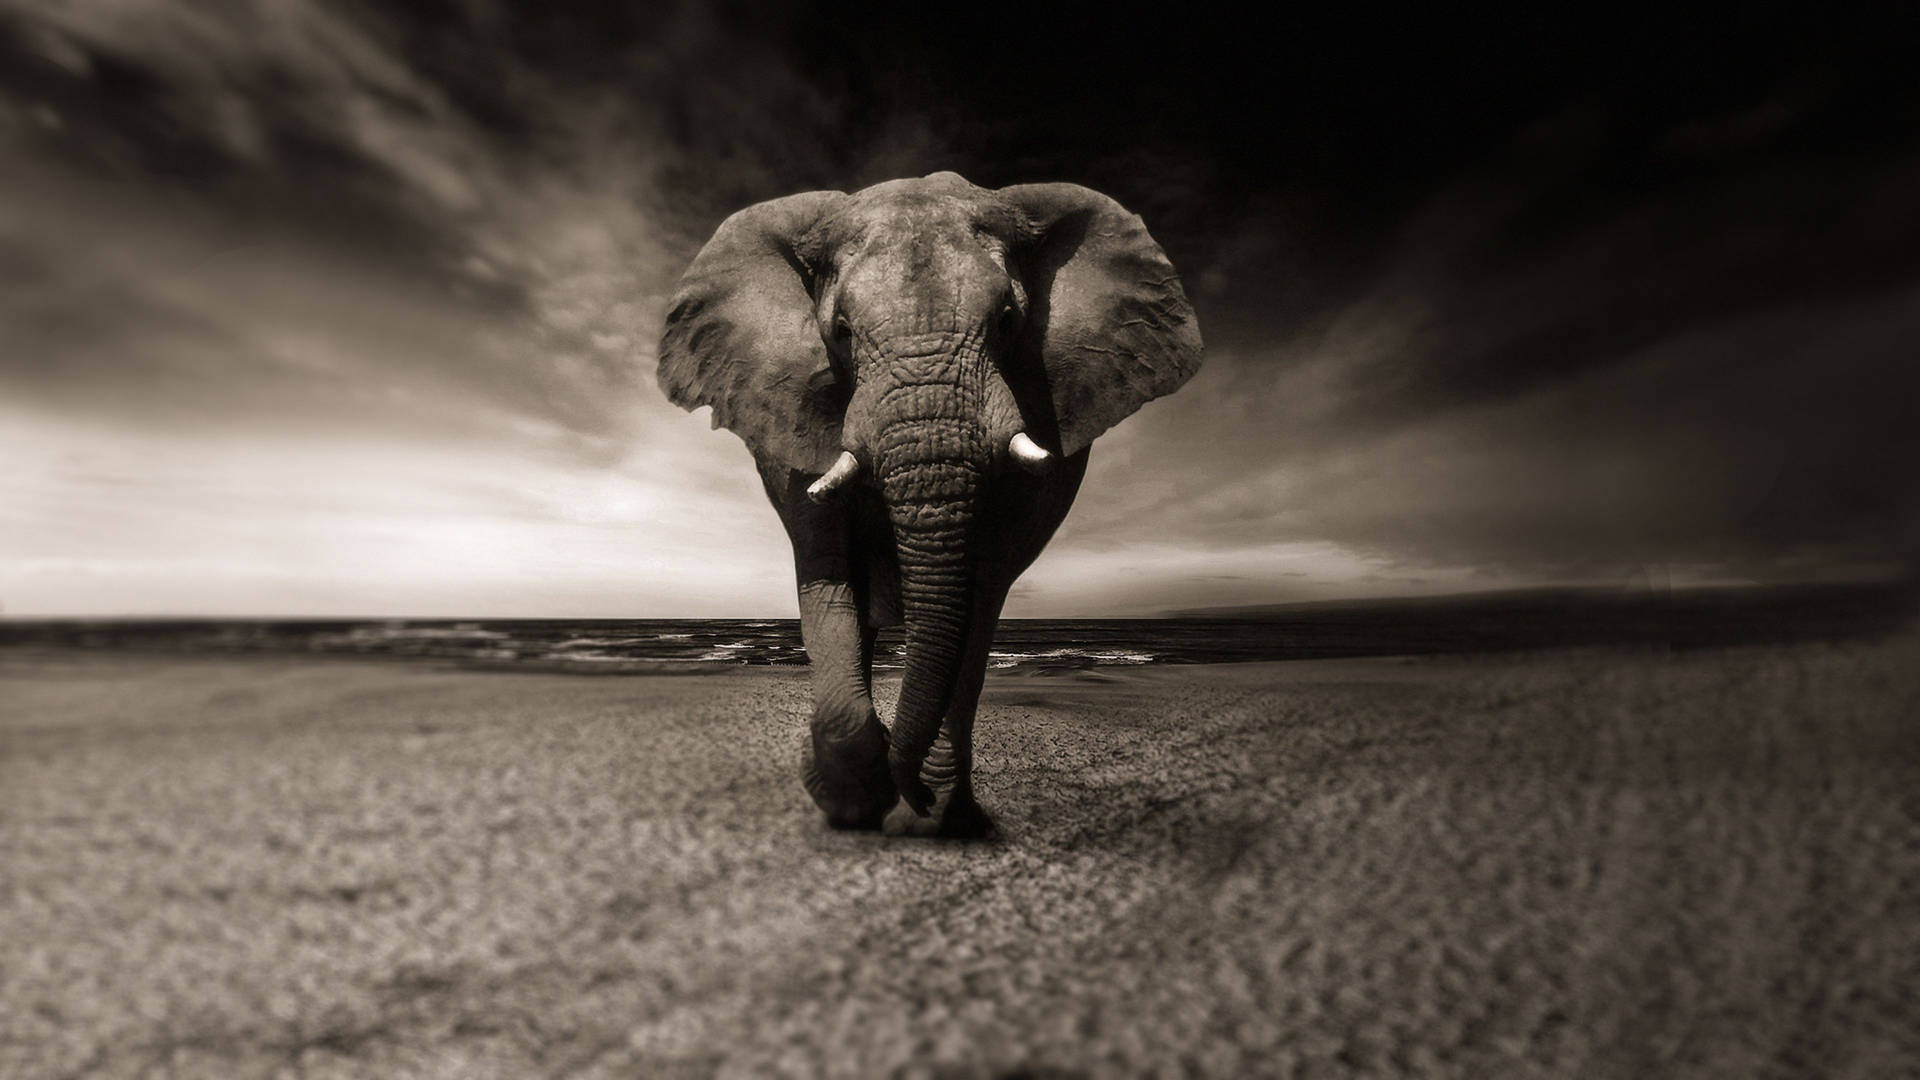 A majestic elephant pictured in its natural environment. Wallpaper